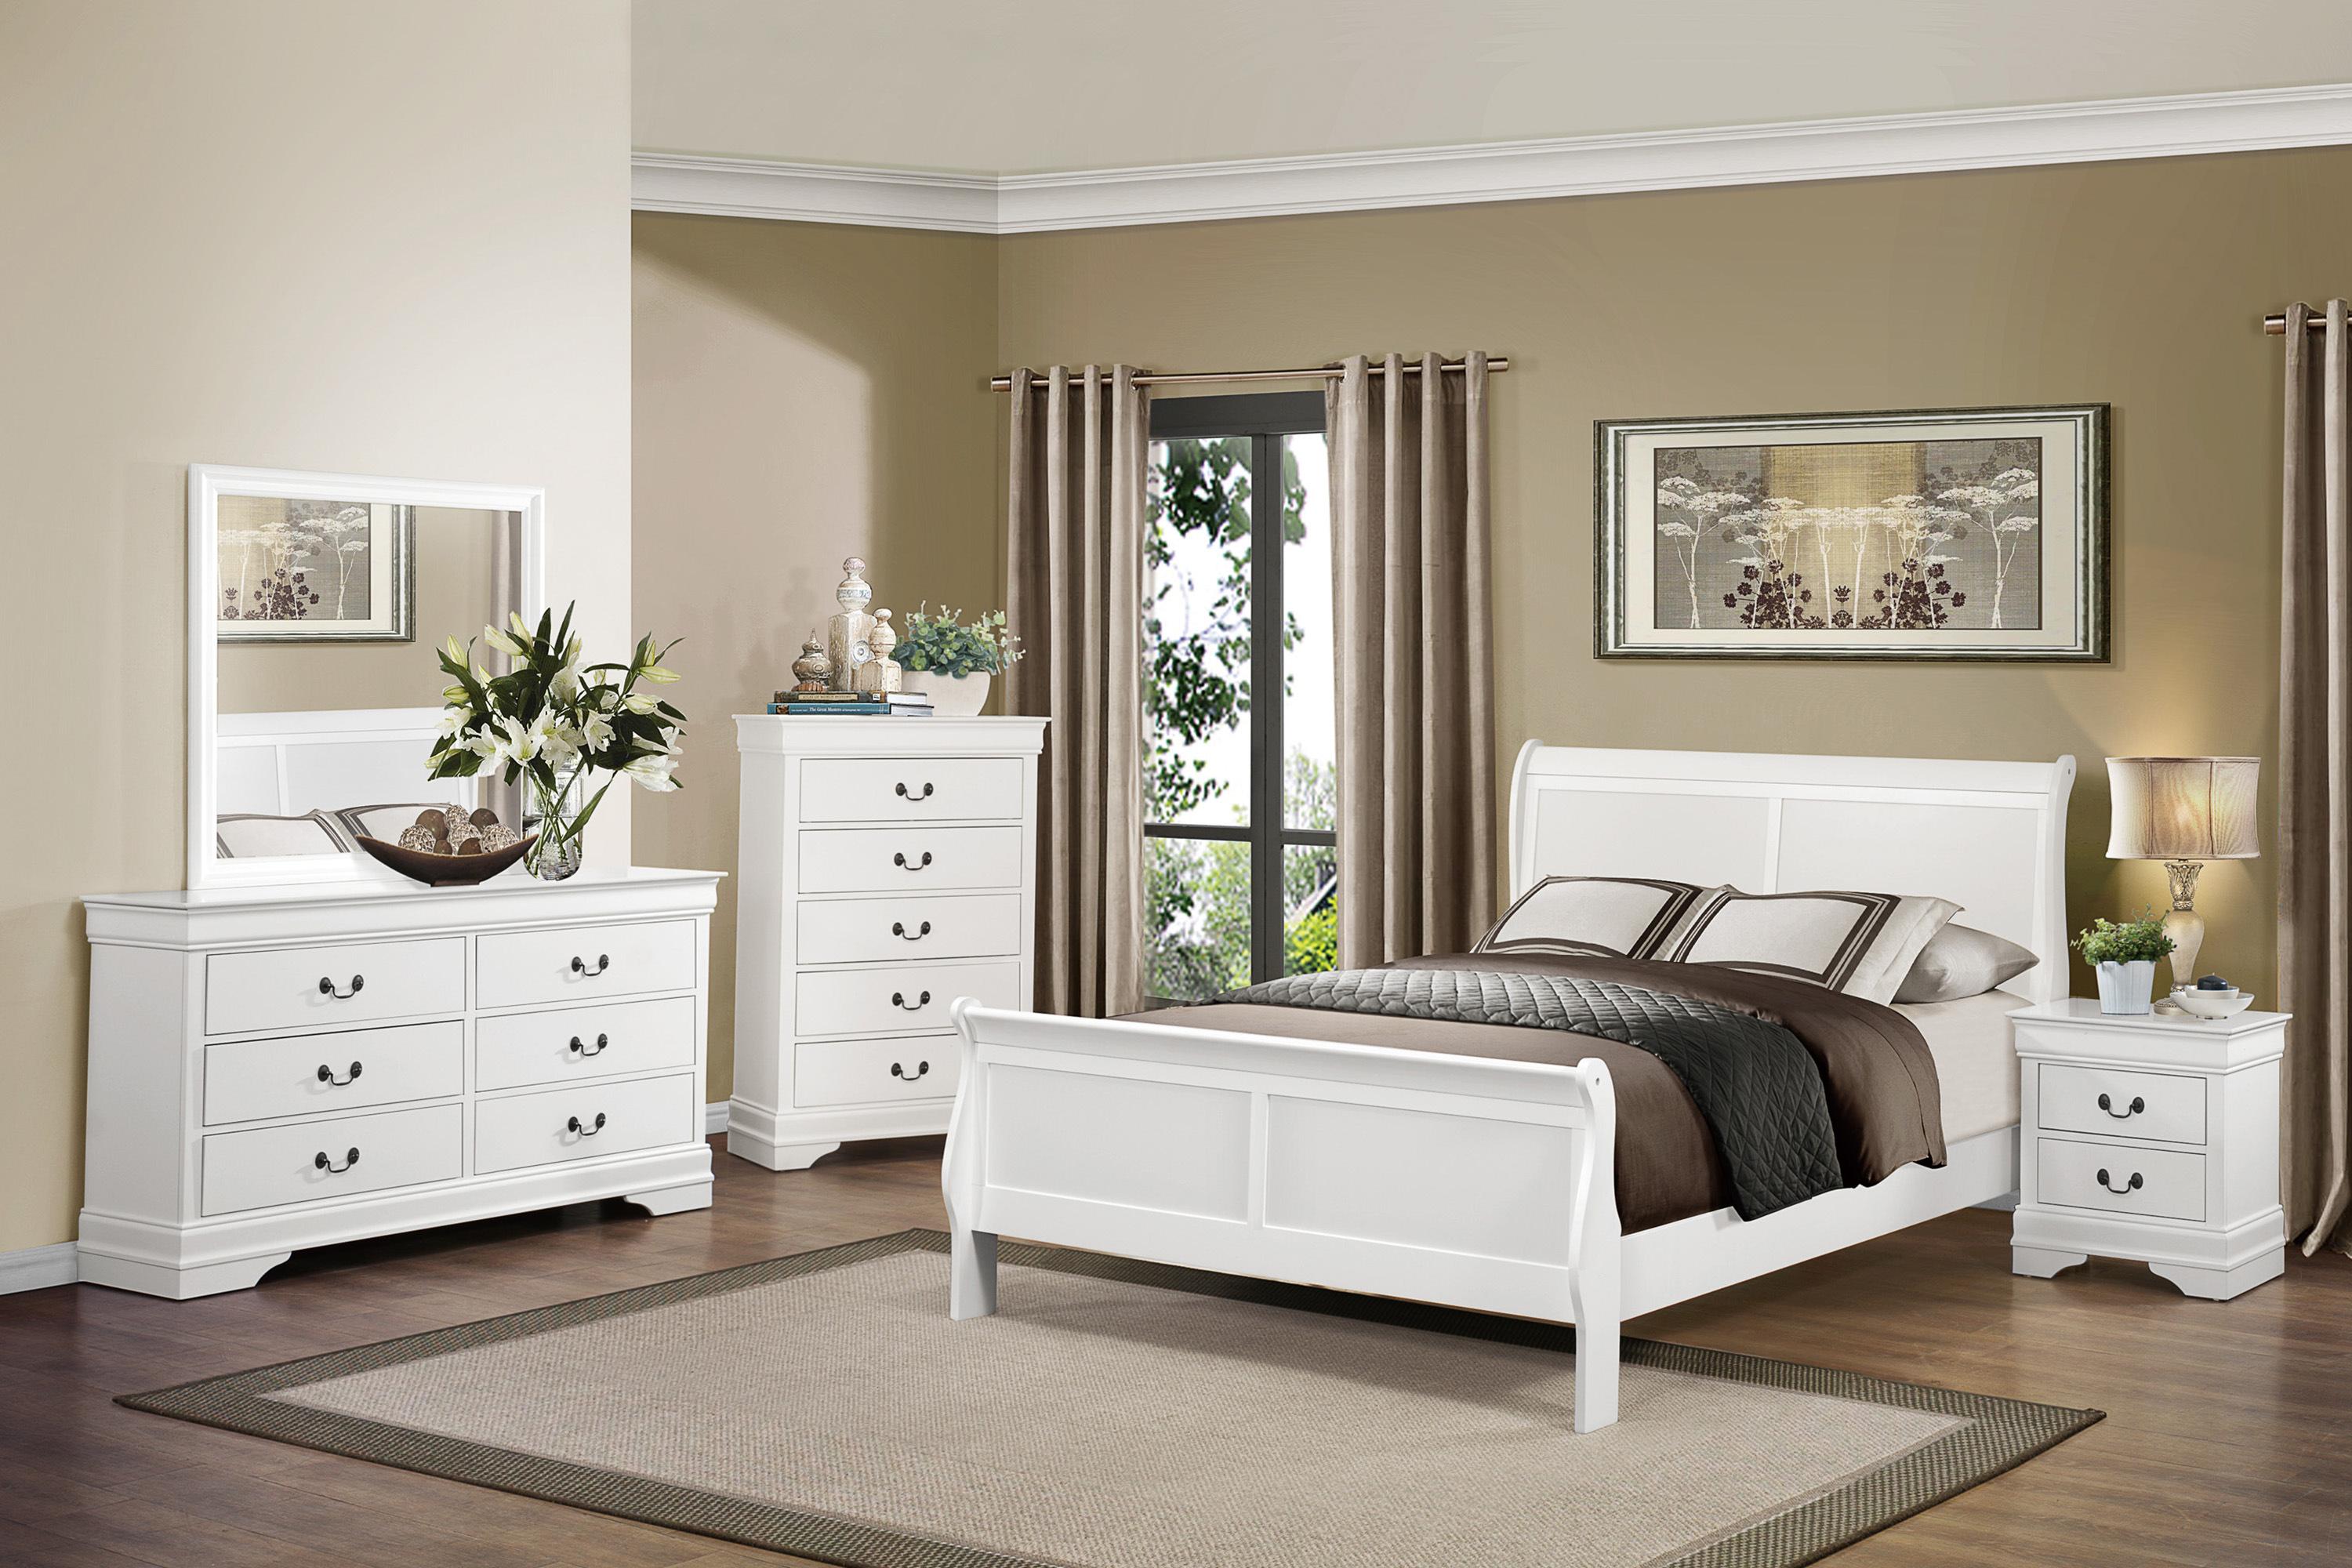 Traditional Bedroom Set 2147KW-1CK-5PC Mayville 2147KW-1CK-5PC in White 